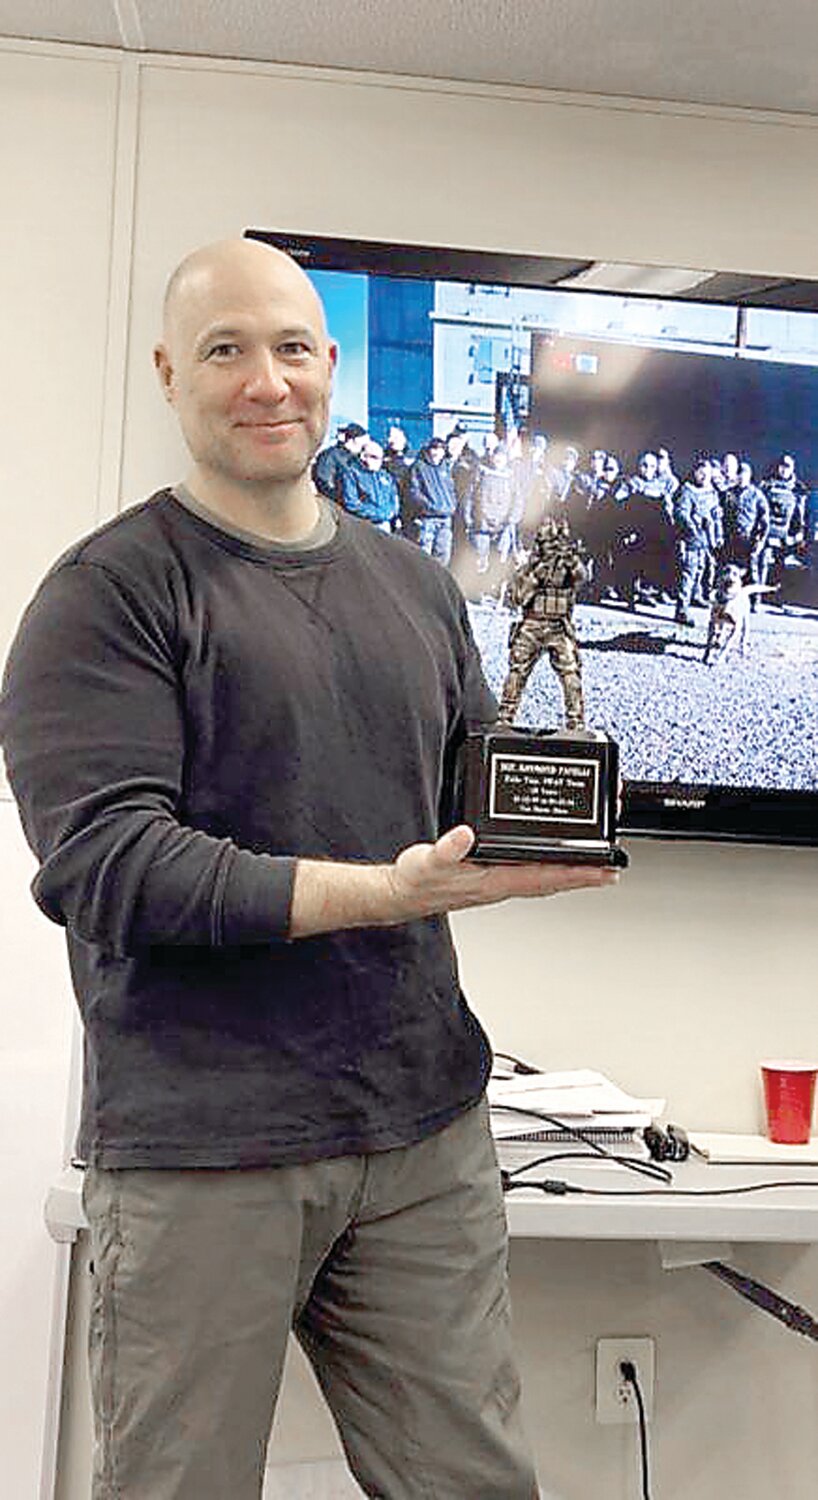 Sgt. Raymond Fanelli, a 27-year veteran of the Falls Township Police Department, holds his recognition award for 25 years of service to the South SWAT team.